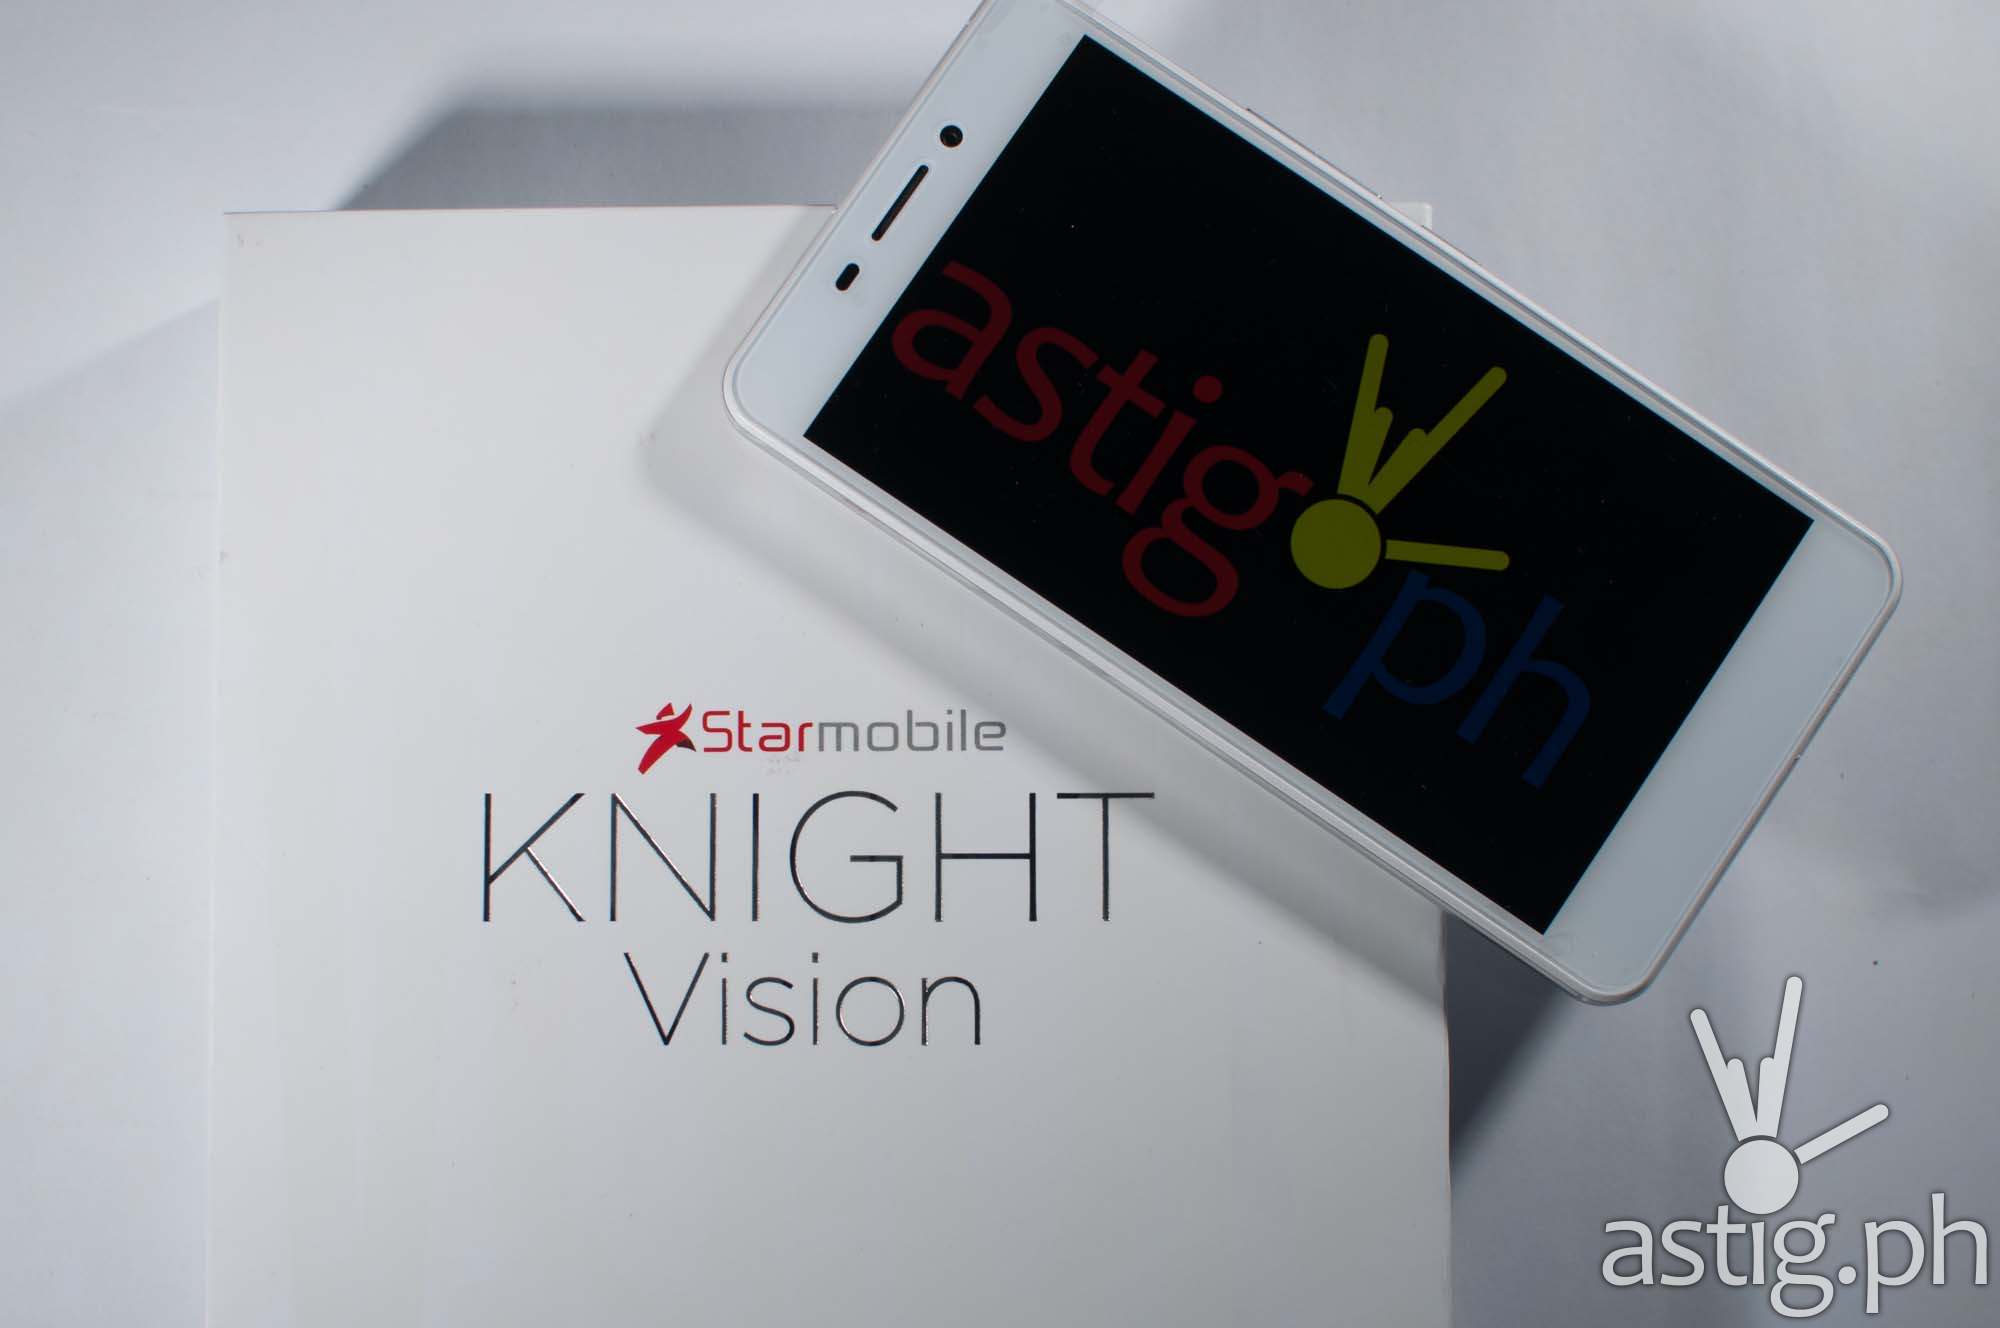 Starmobile Knight Vision Android smartphone + digital telelvision